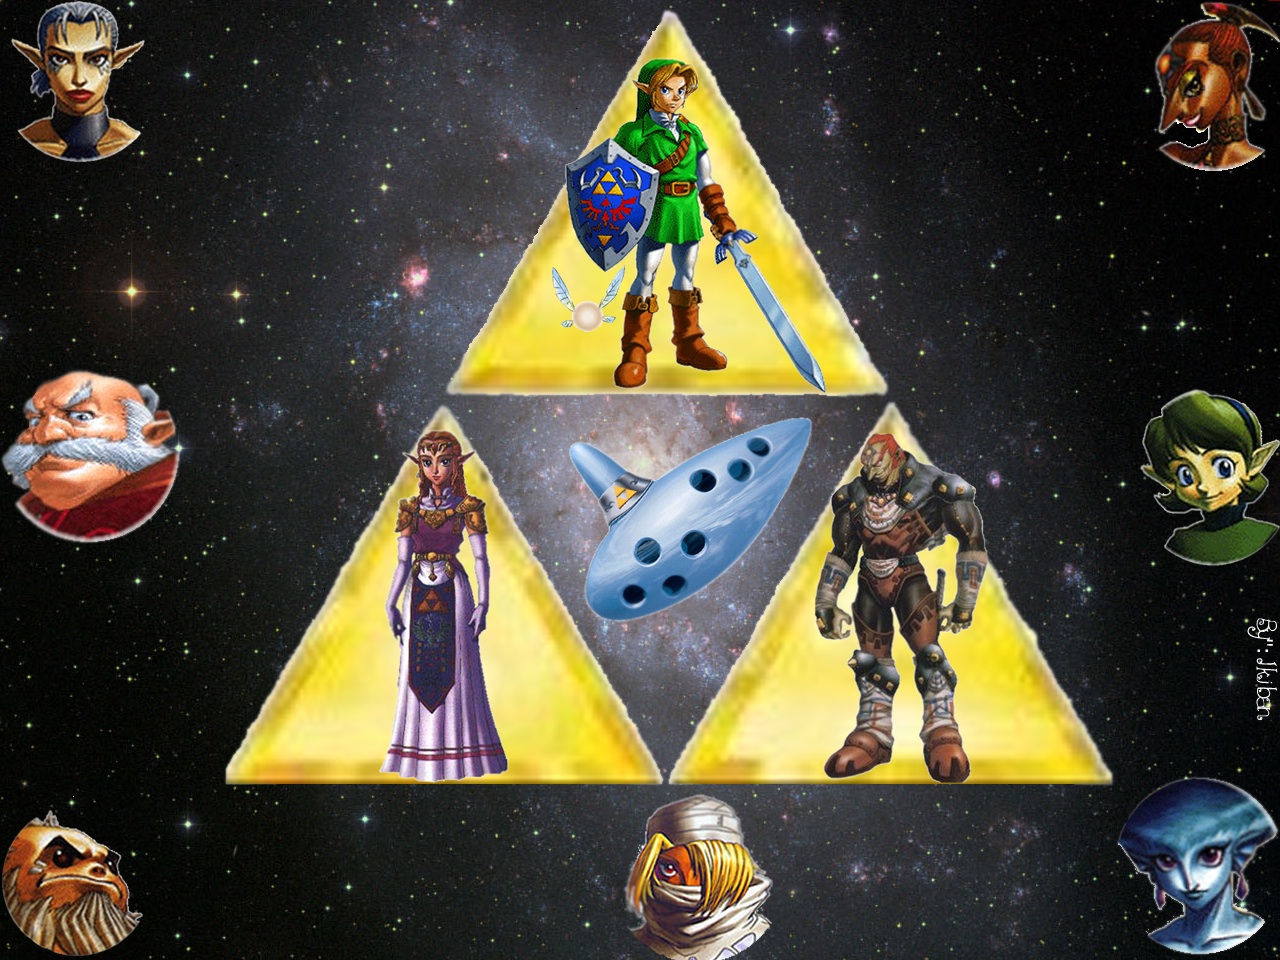 video game, darunia (the legend of zelda), ganondorf, impa (the legend of zelda), link, nabooru (the legend of zelda), rauru (the legend of zelda), ruto (the legend of zelda), saria (the legend of zelda), sheik (the legend of zelda), zelda, the legend of zelda: ocarina of time